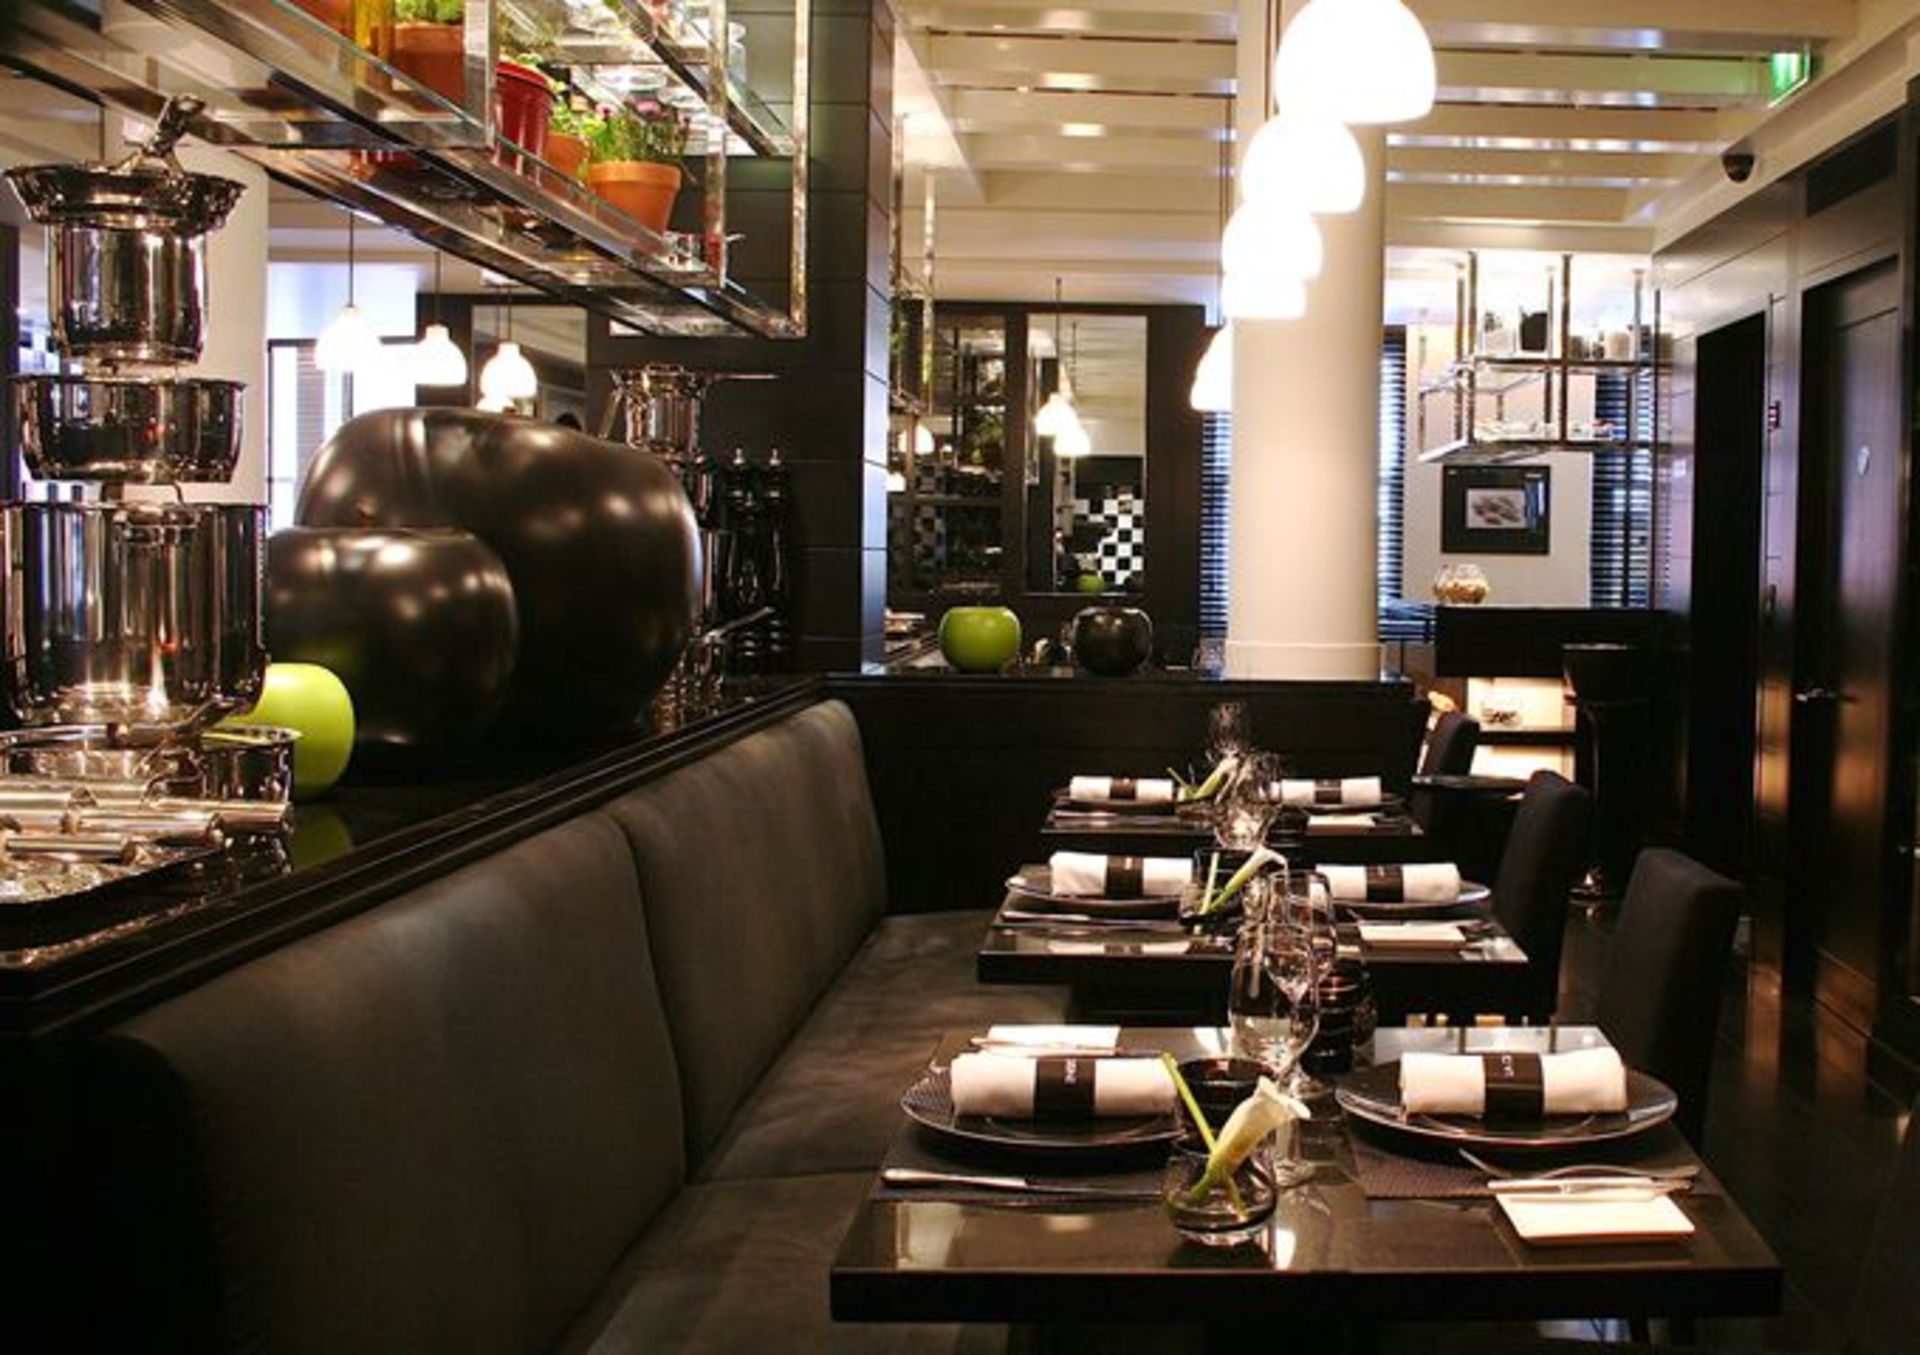 4 x Restaurant Bistro Tables With Granite Stone Tops and Substantial Metal Bases - Dimensions: H77 x - Image 7 of 7